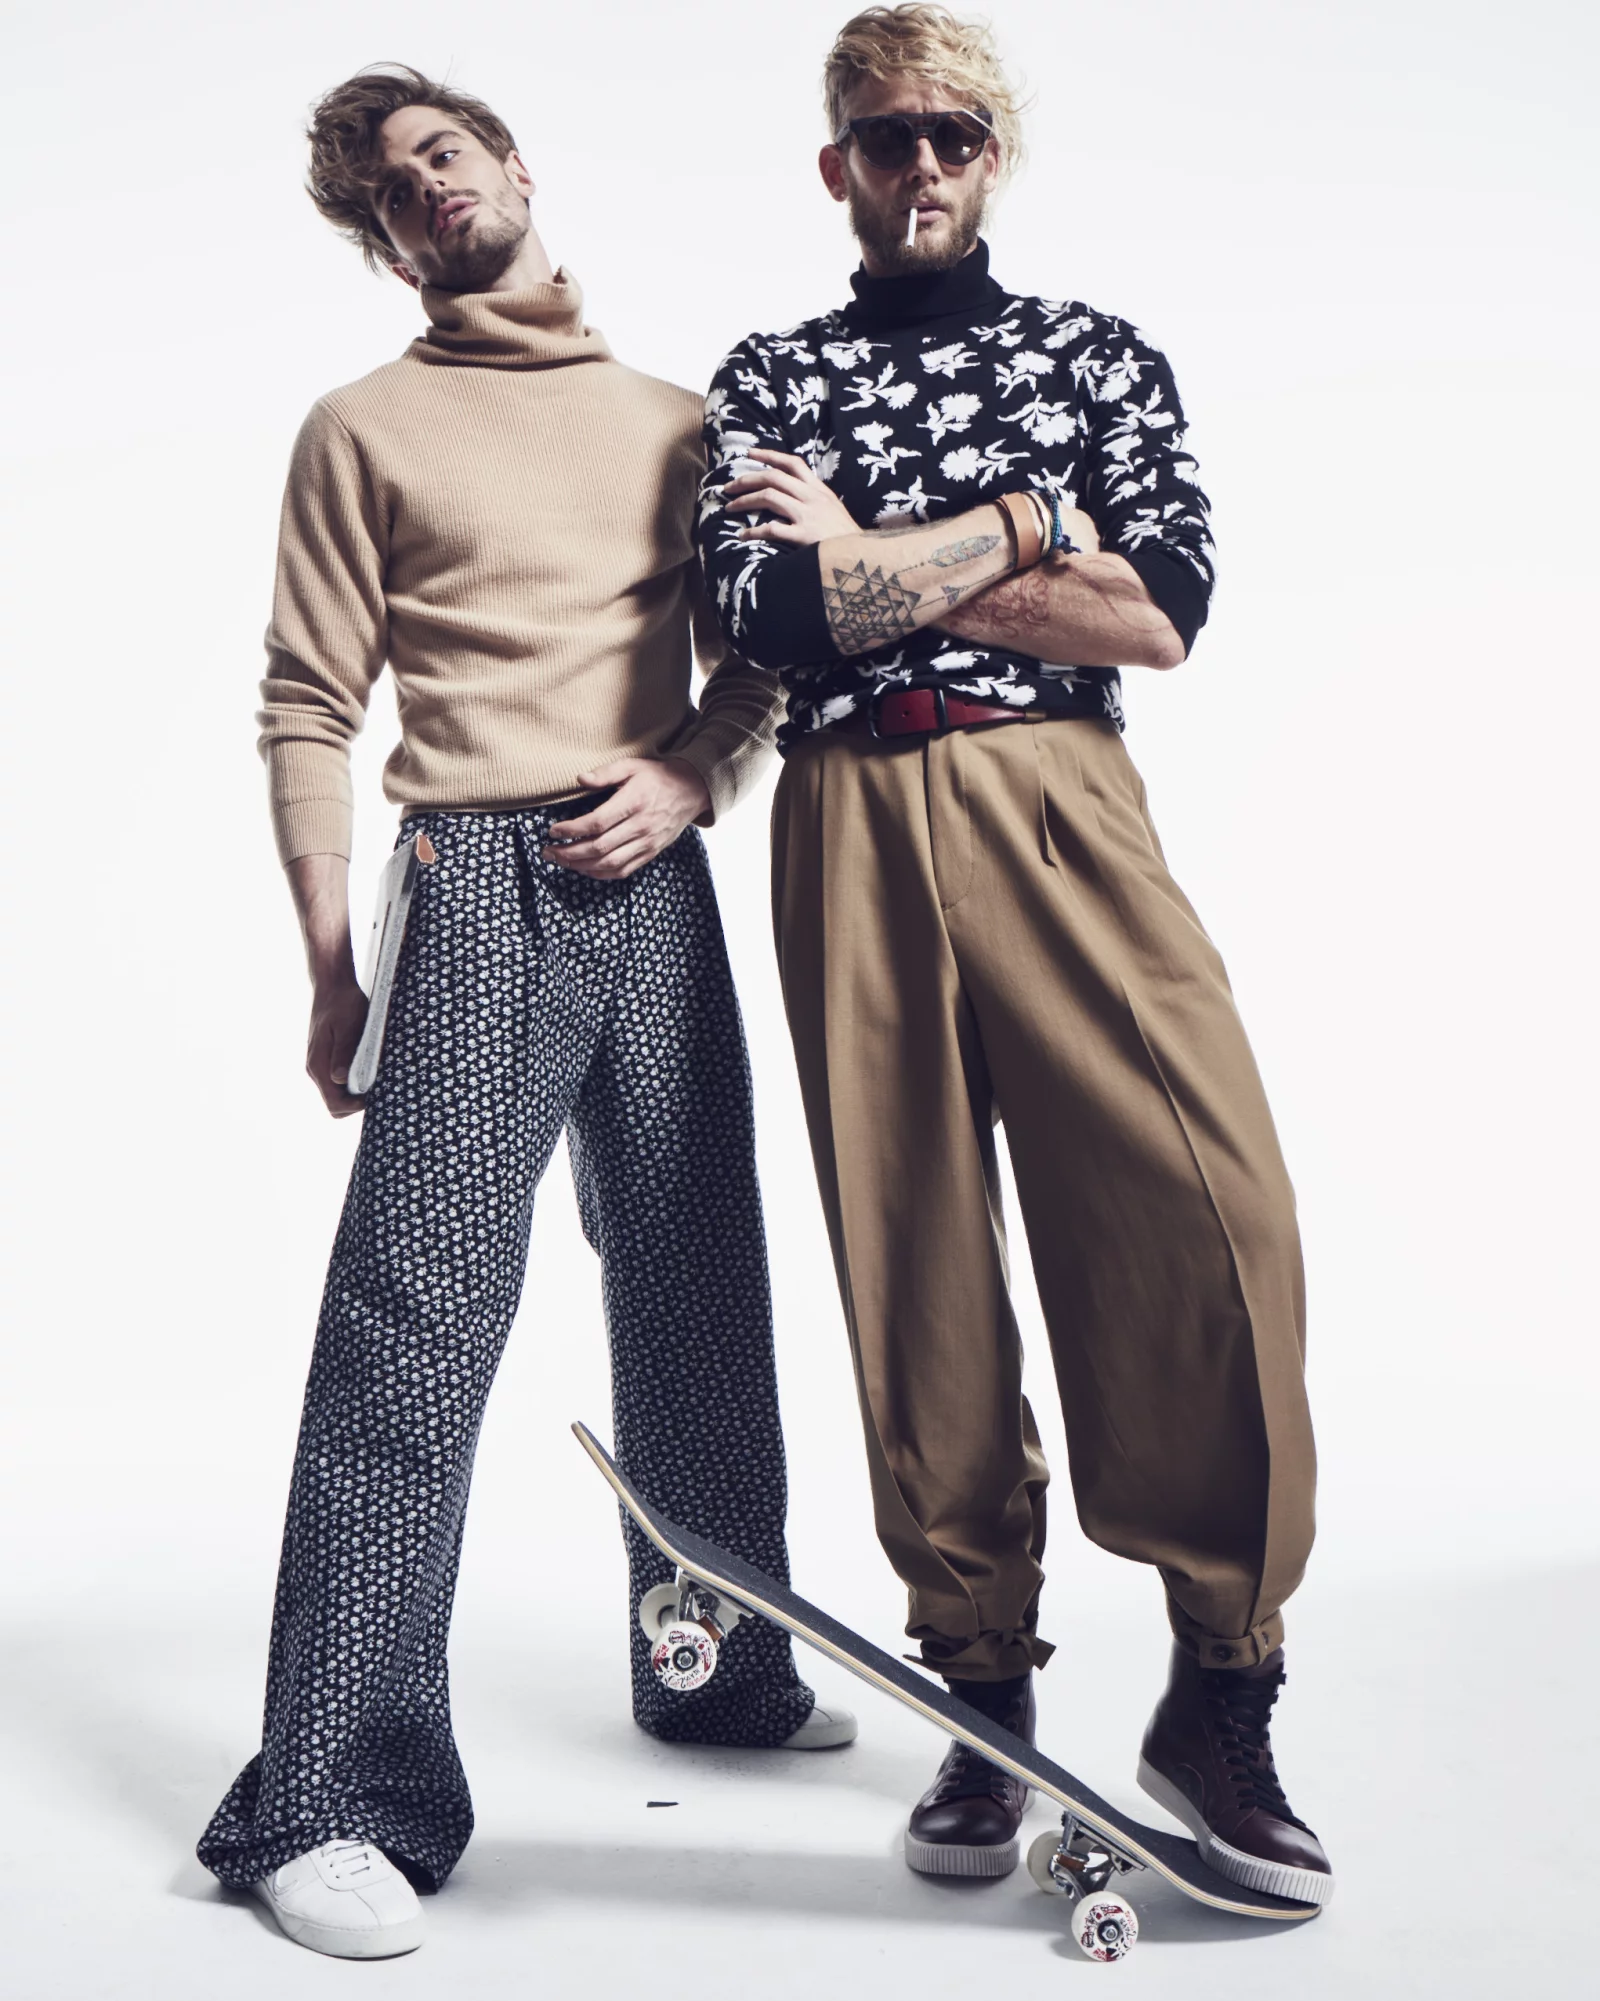 InStyle Men 7 by Andreas ORTNER